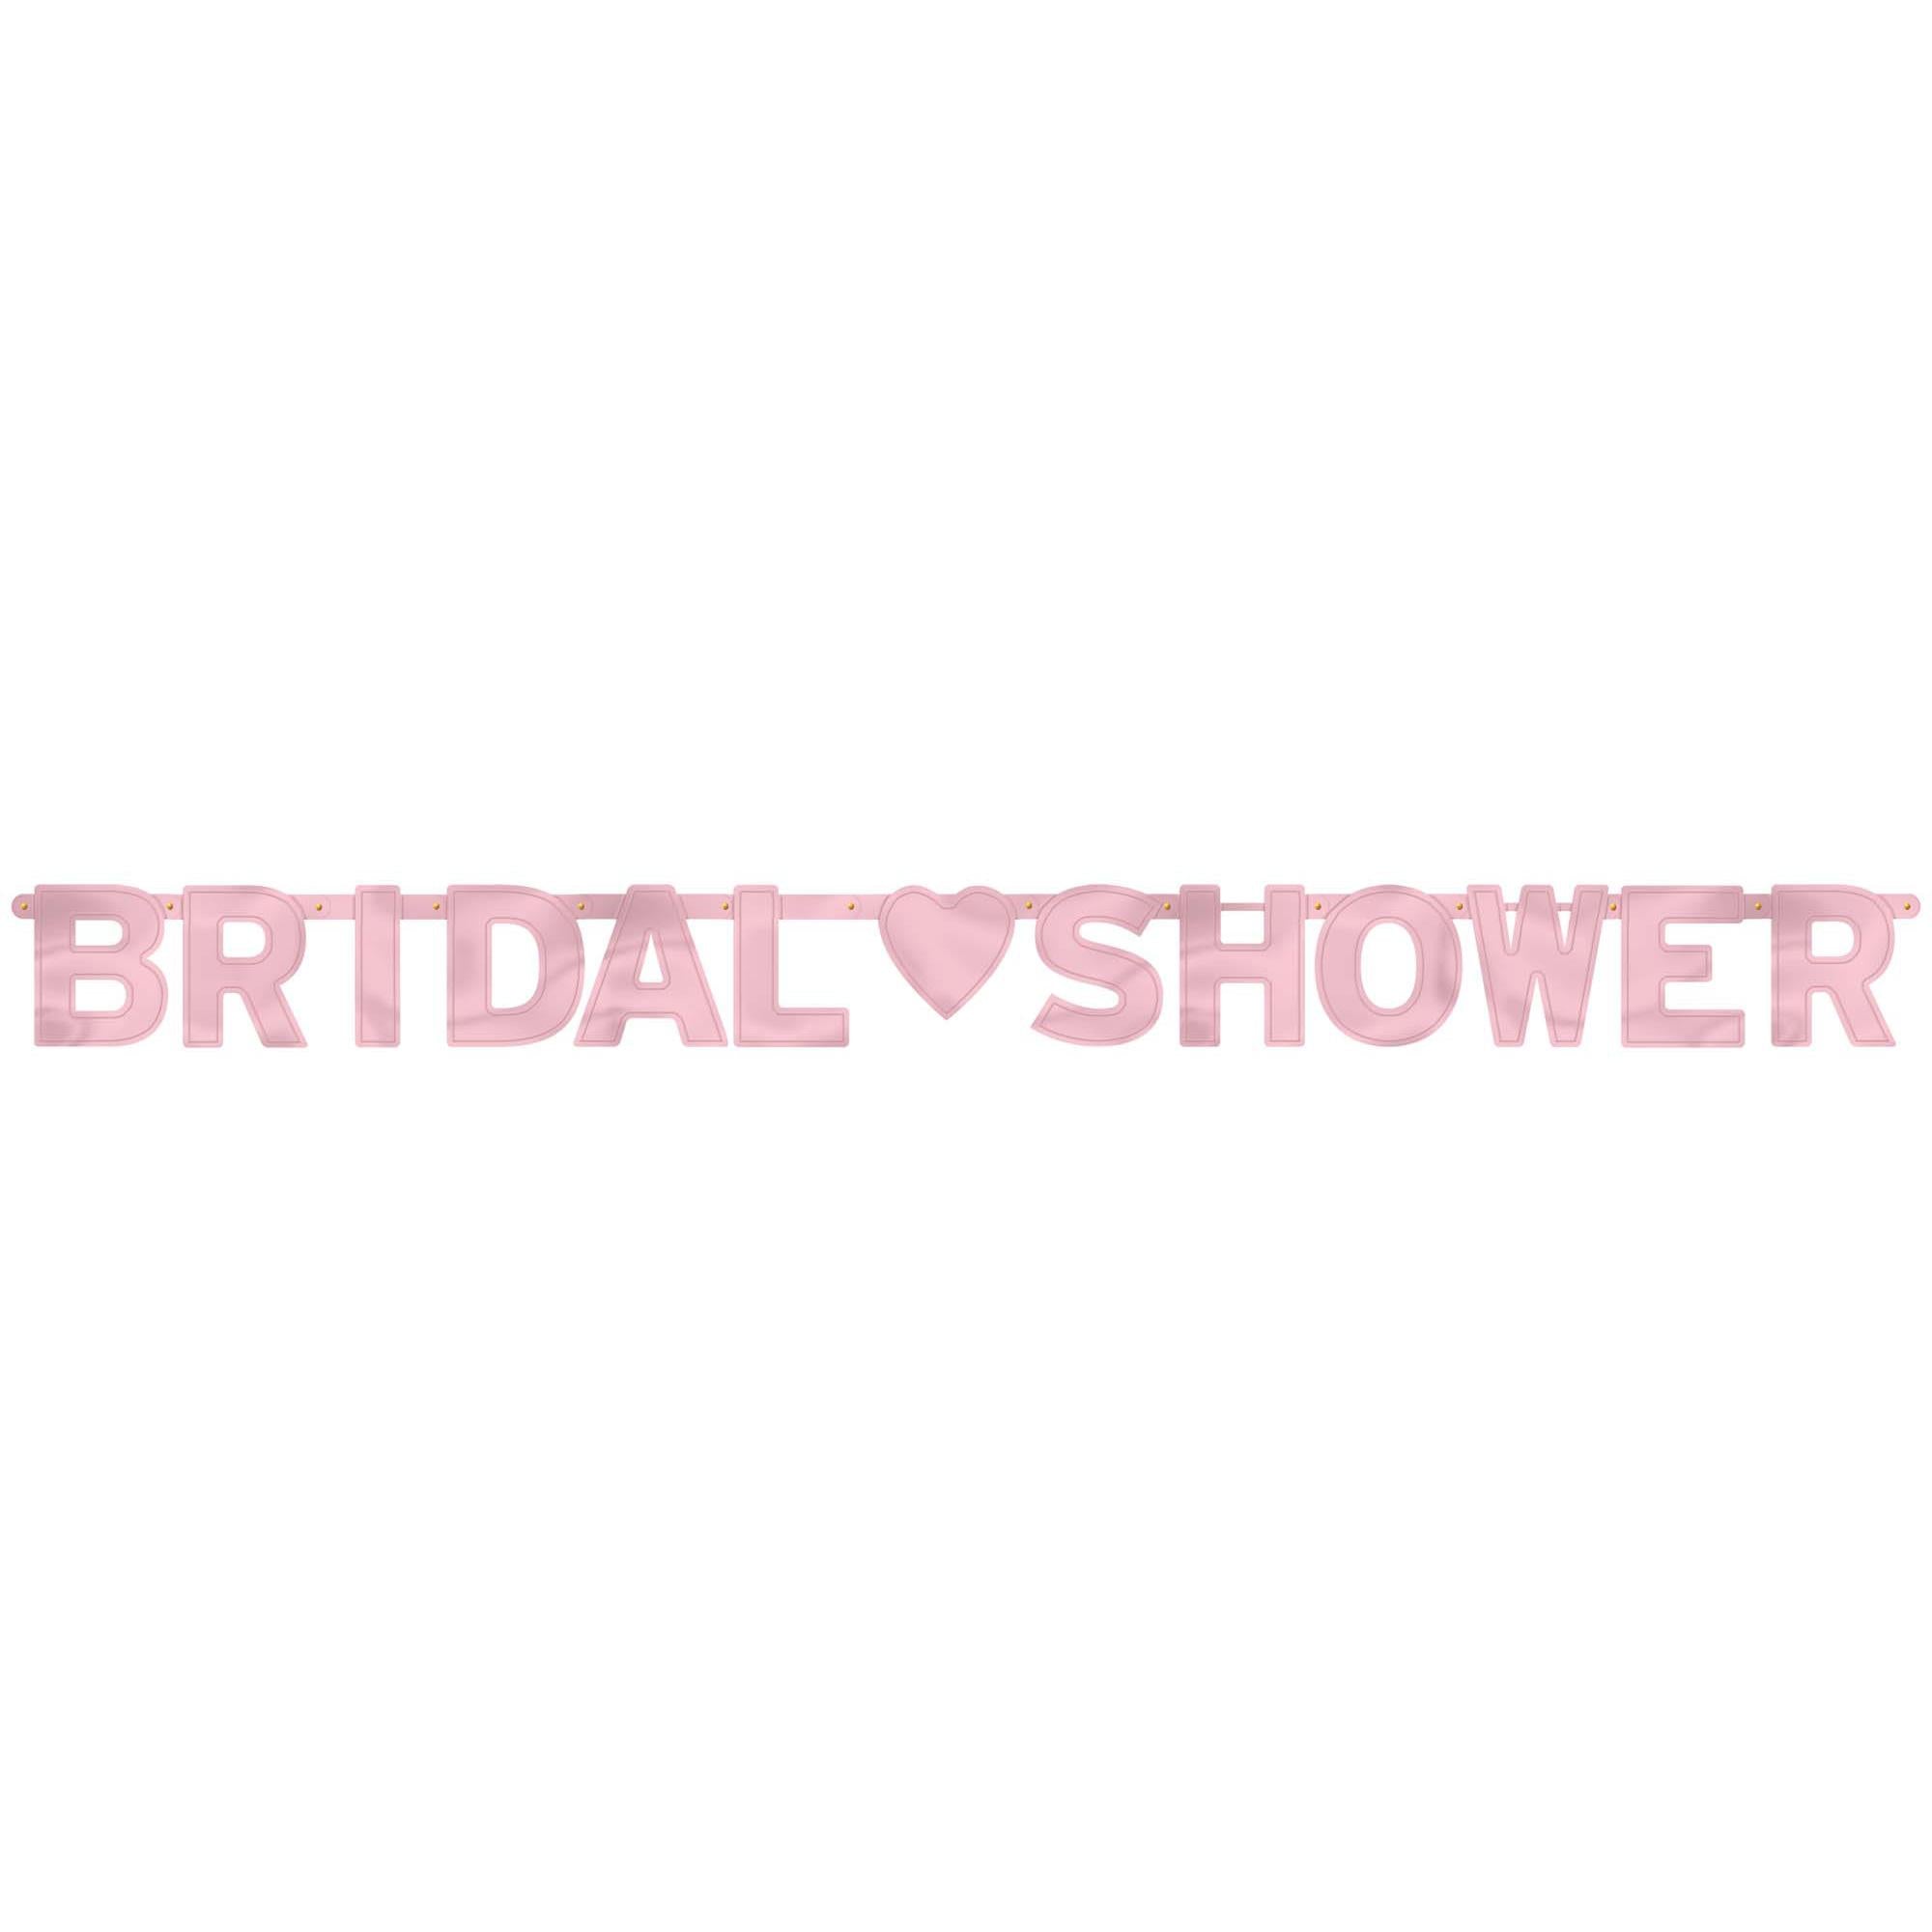 Bridal Shower Letter Banner 6ft x 6.25in Decorations - Party Centre